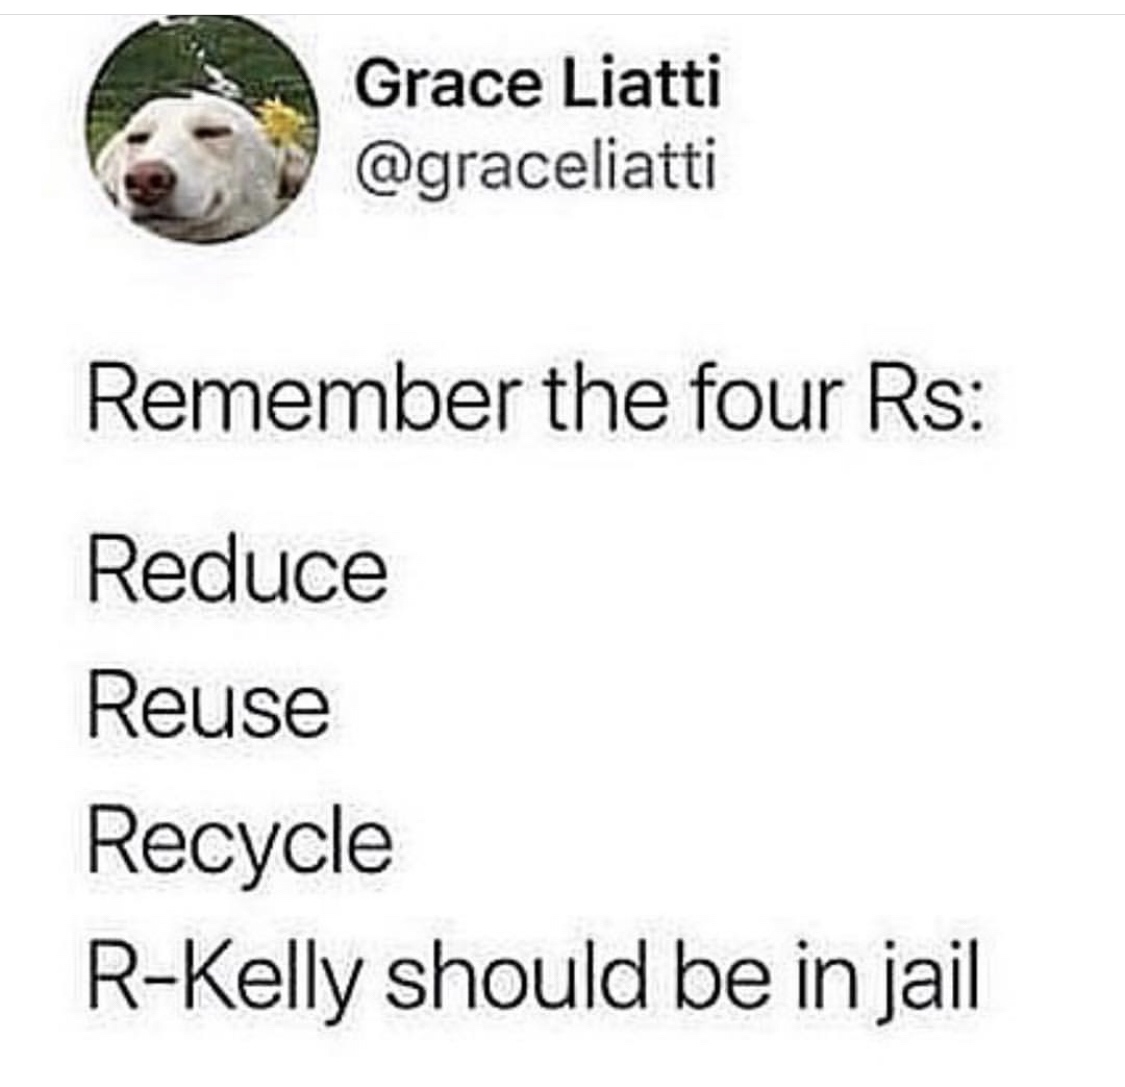 memes - animal - Grace Liatti Remember the four Rs Reduce Reuse Recycle RKelly should be in jail